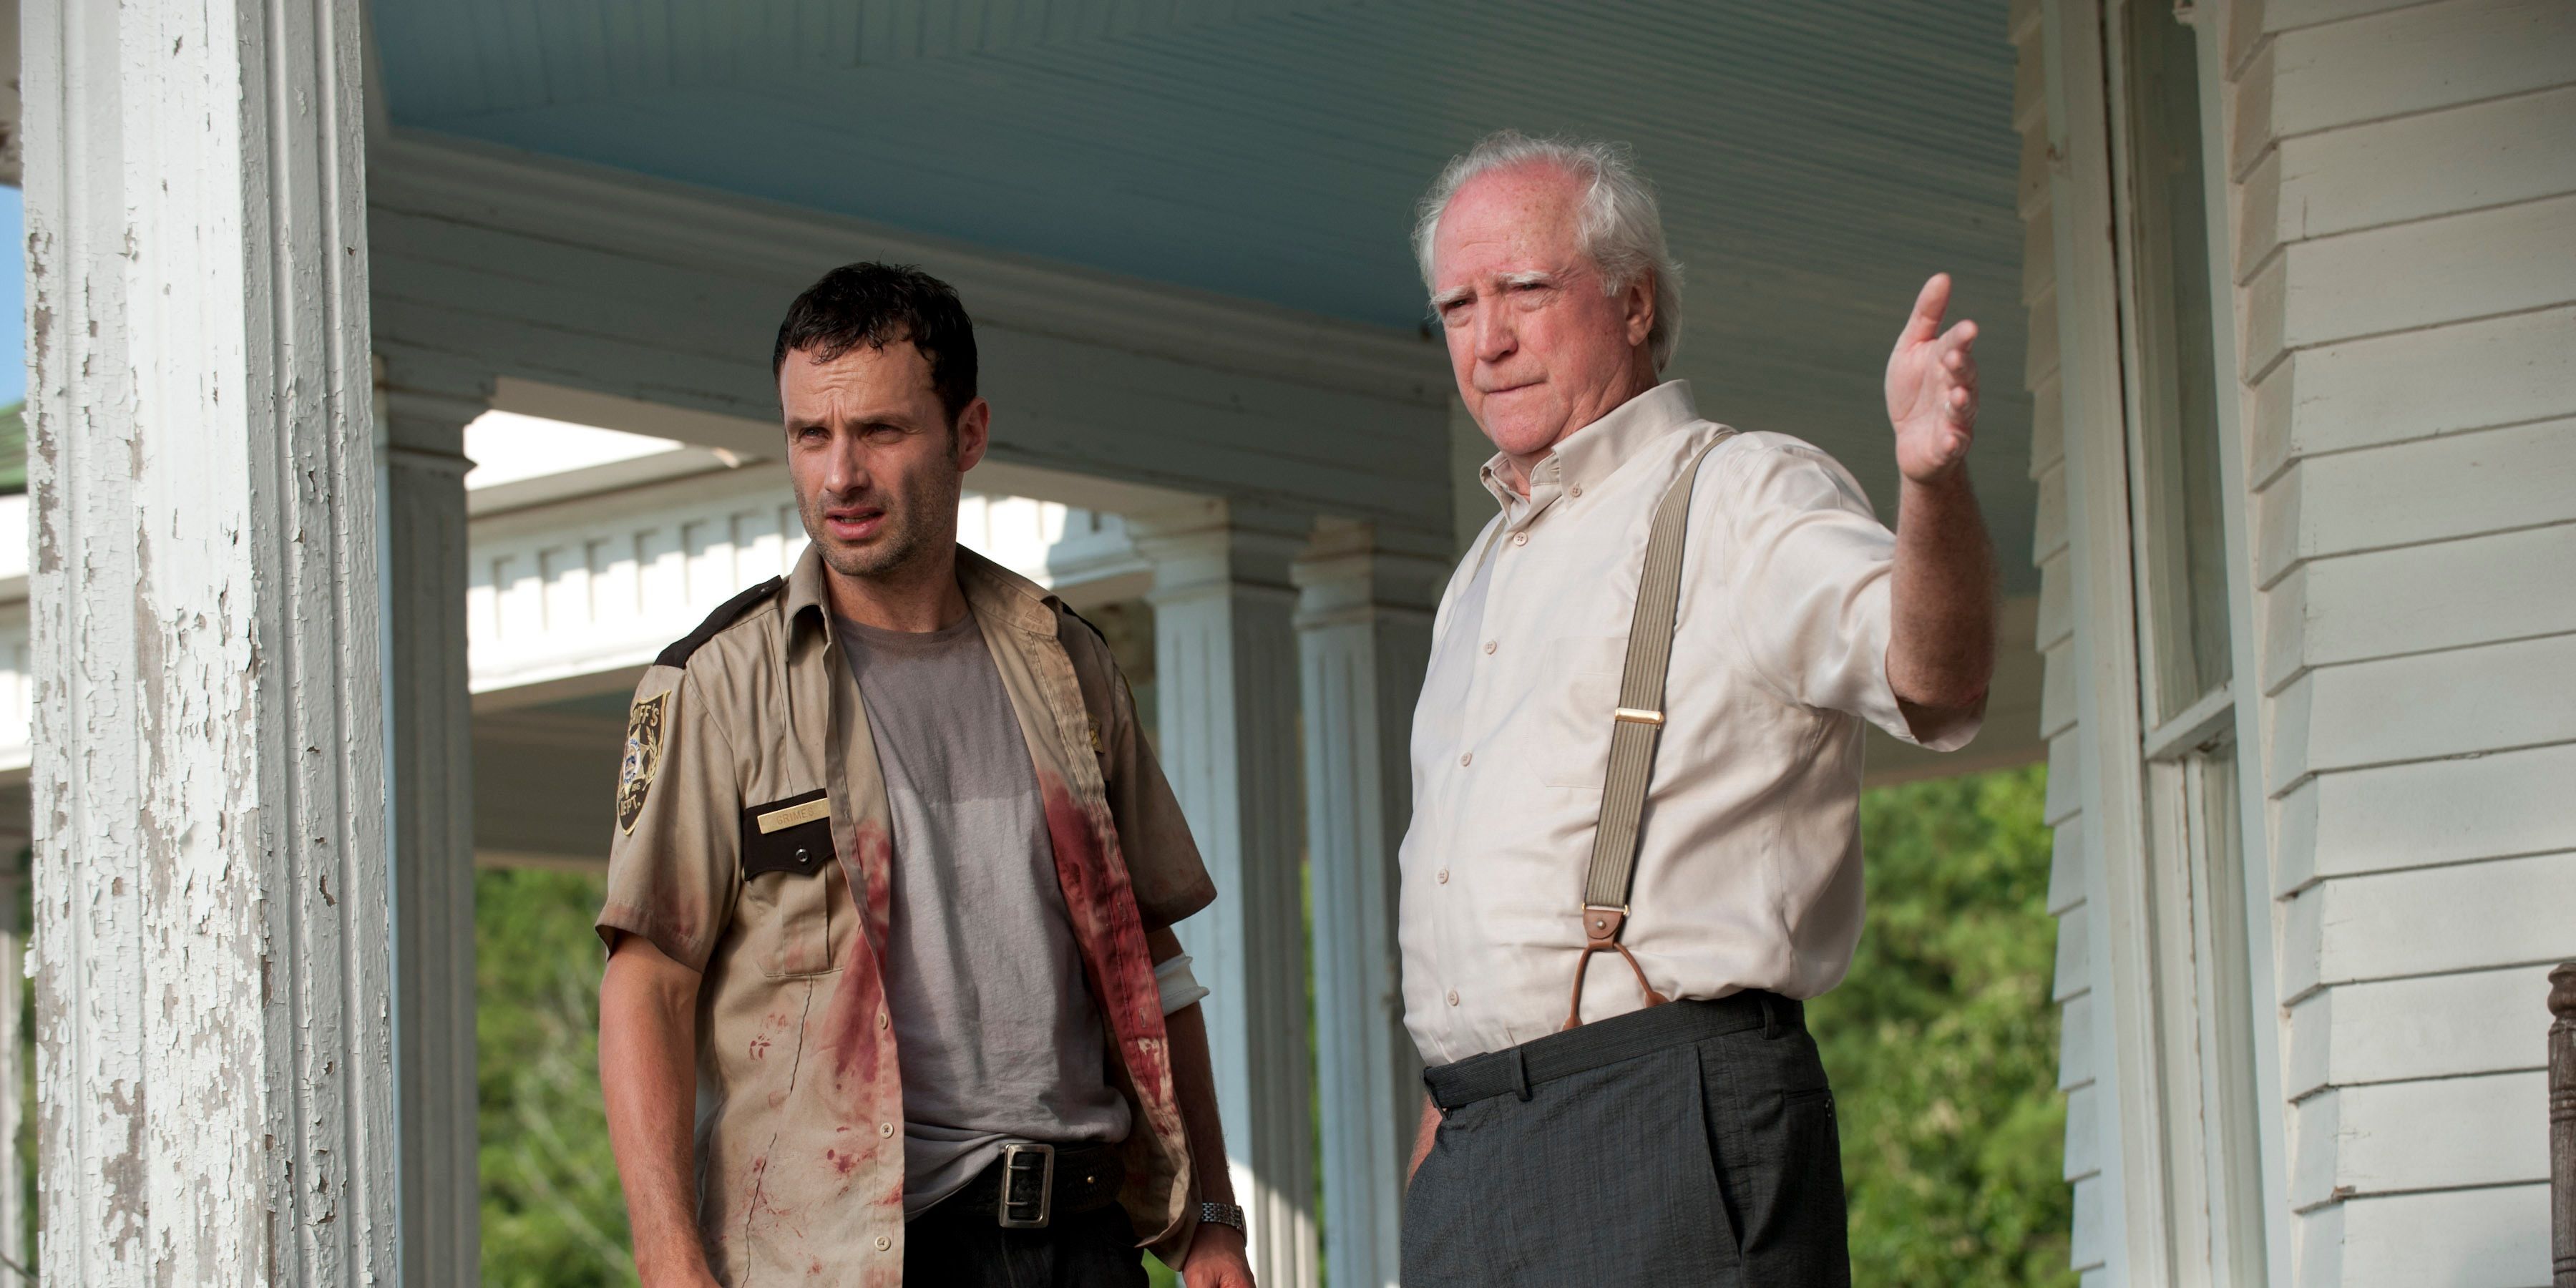 Walking Dead Hershel and Rick at the Farm on the Porch